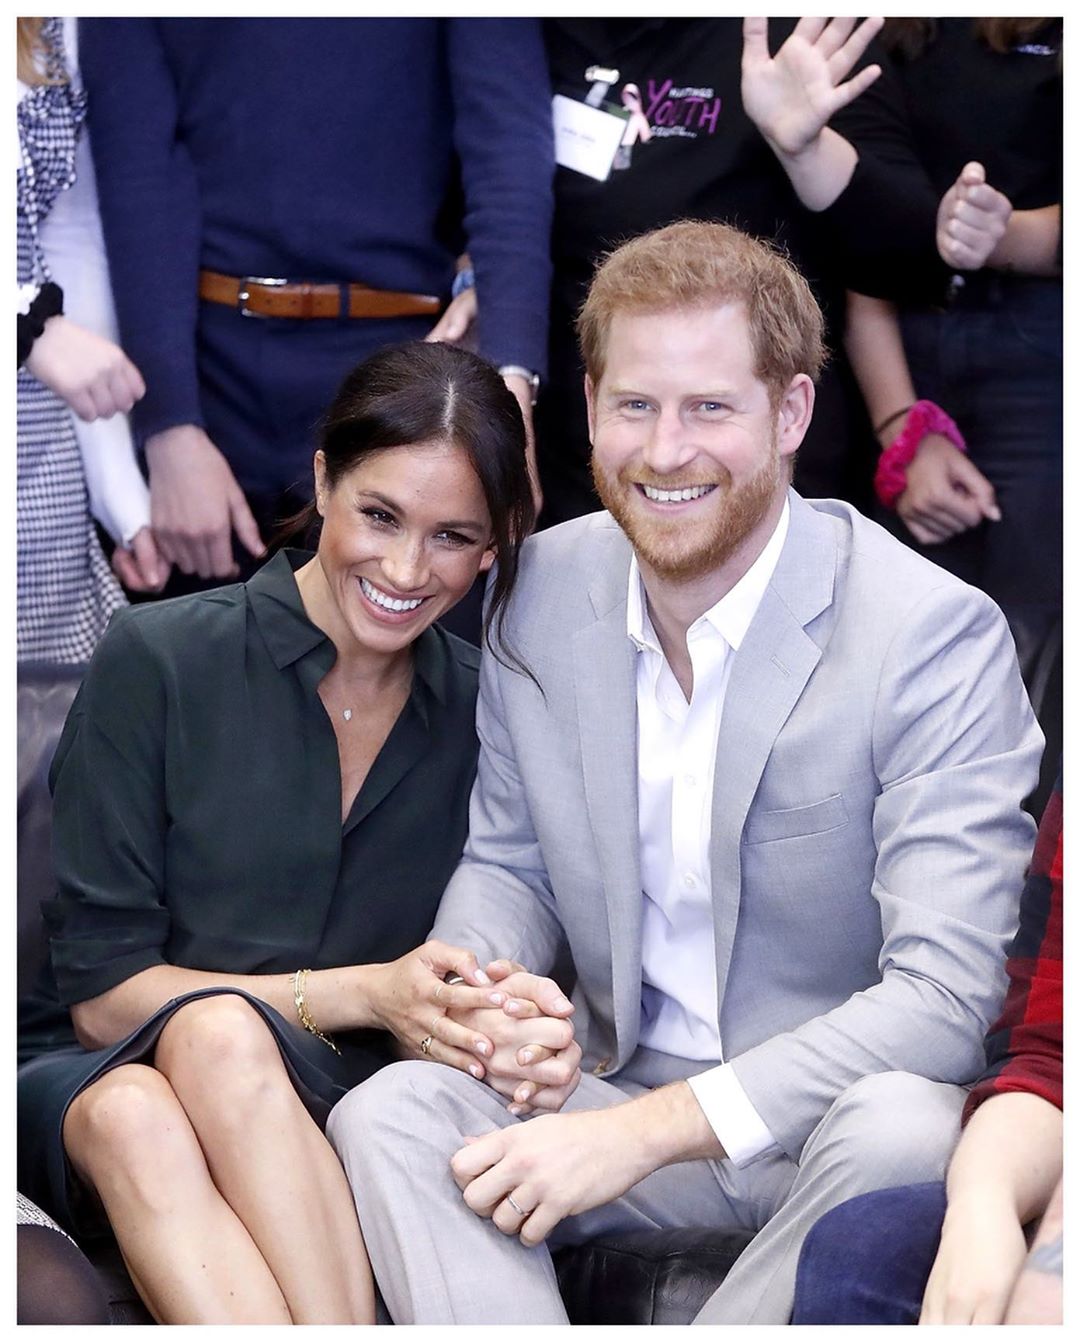 Prince Harry and his wife, Meghan Markle have both announced that they will be stepping aside as senior members of the British royal family. [Instagram/SussexRoyal]